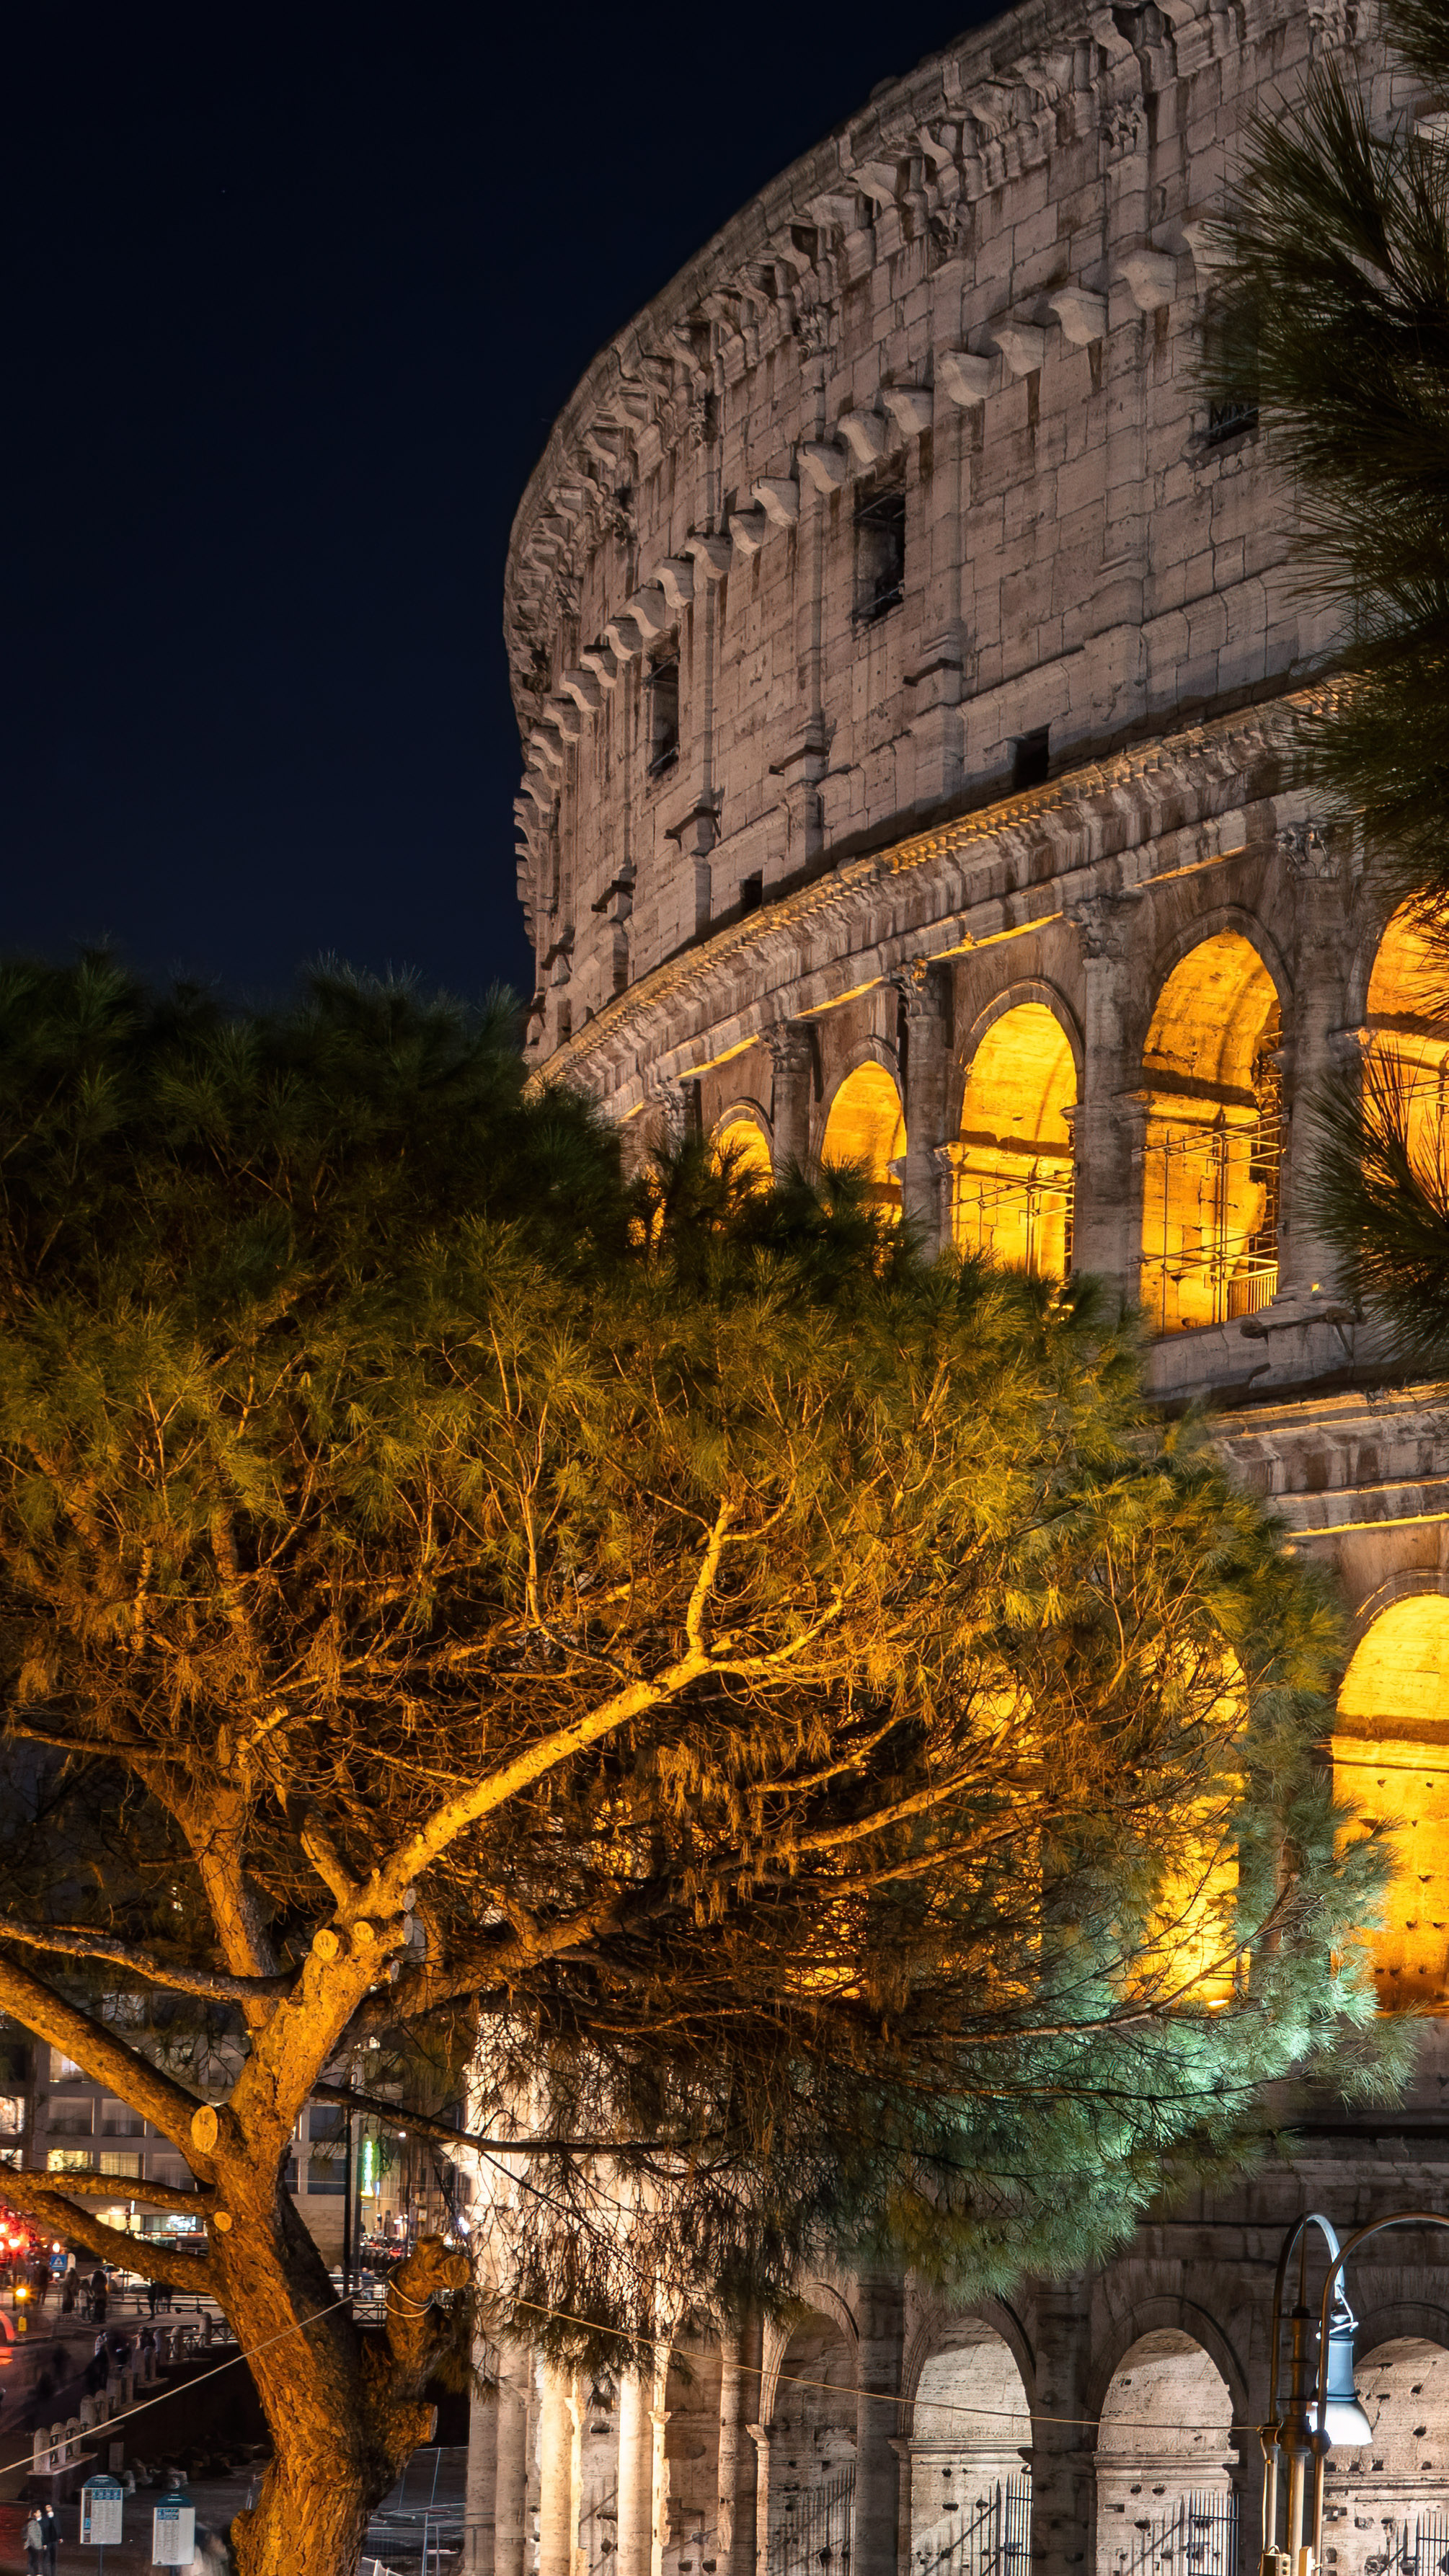 Travel to the heart of Italy with our nighttime wallpaper featuring the lights of Rome’s Colosseum, adding a touch of historical grandeur to your device.